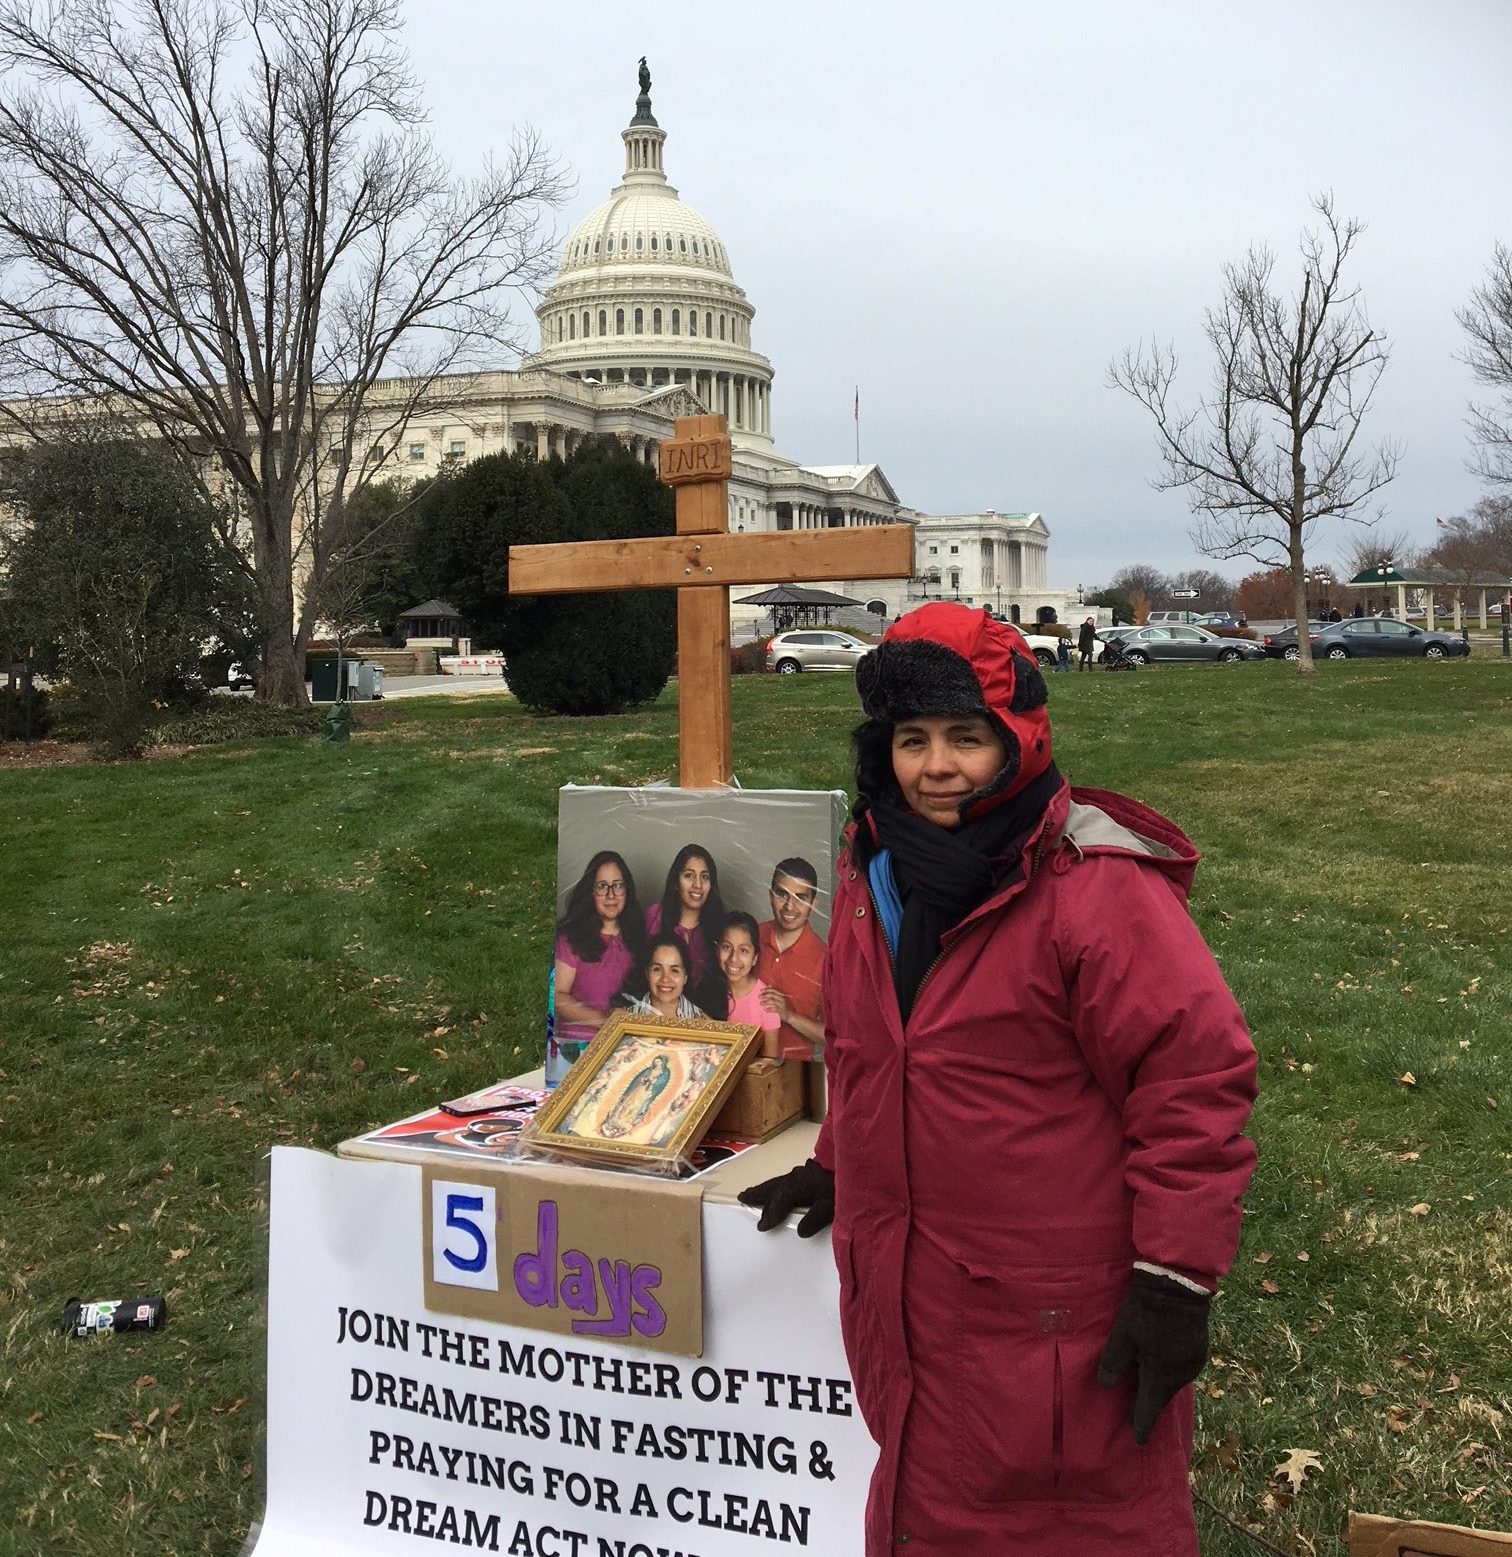 Antonia, a mother of four "Dreamers" fasted for 12 days in December to encourage Congress to act on the Deferred Action for Childhood Arrivals (DACA) program. Chase Chabot for Bread for the World.